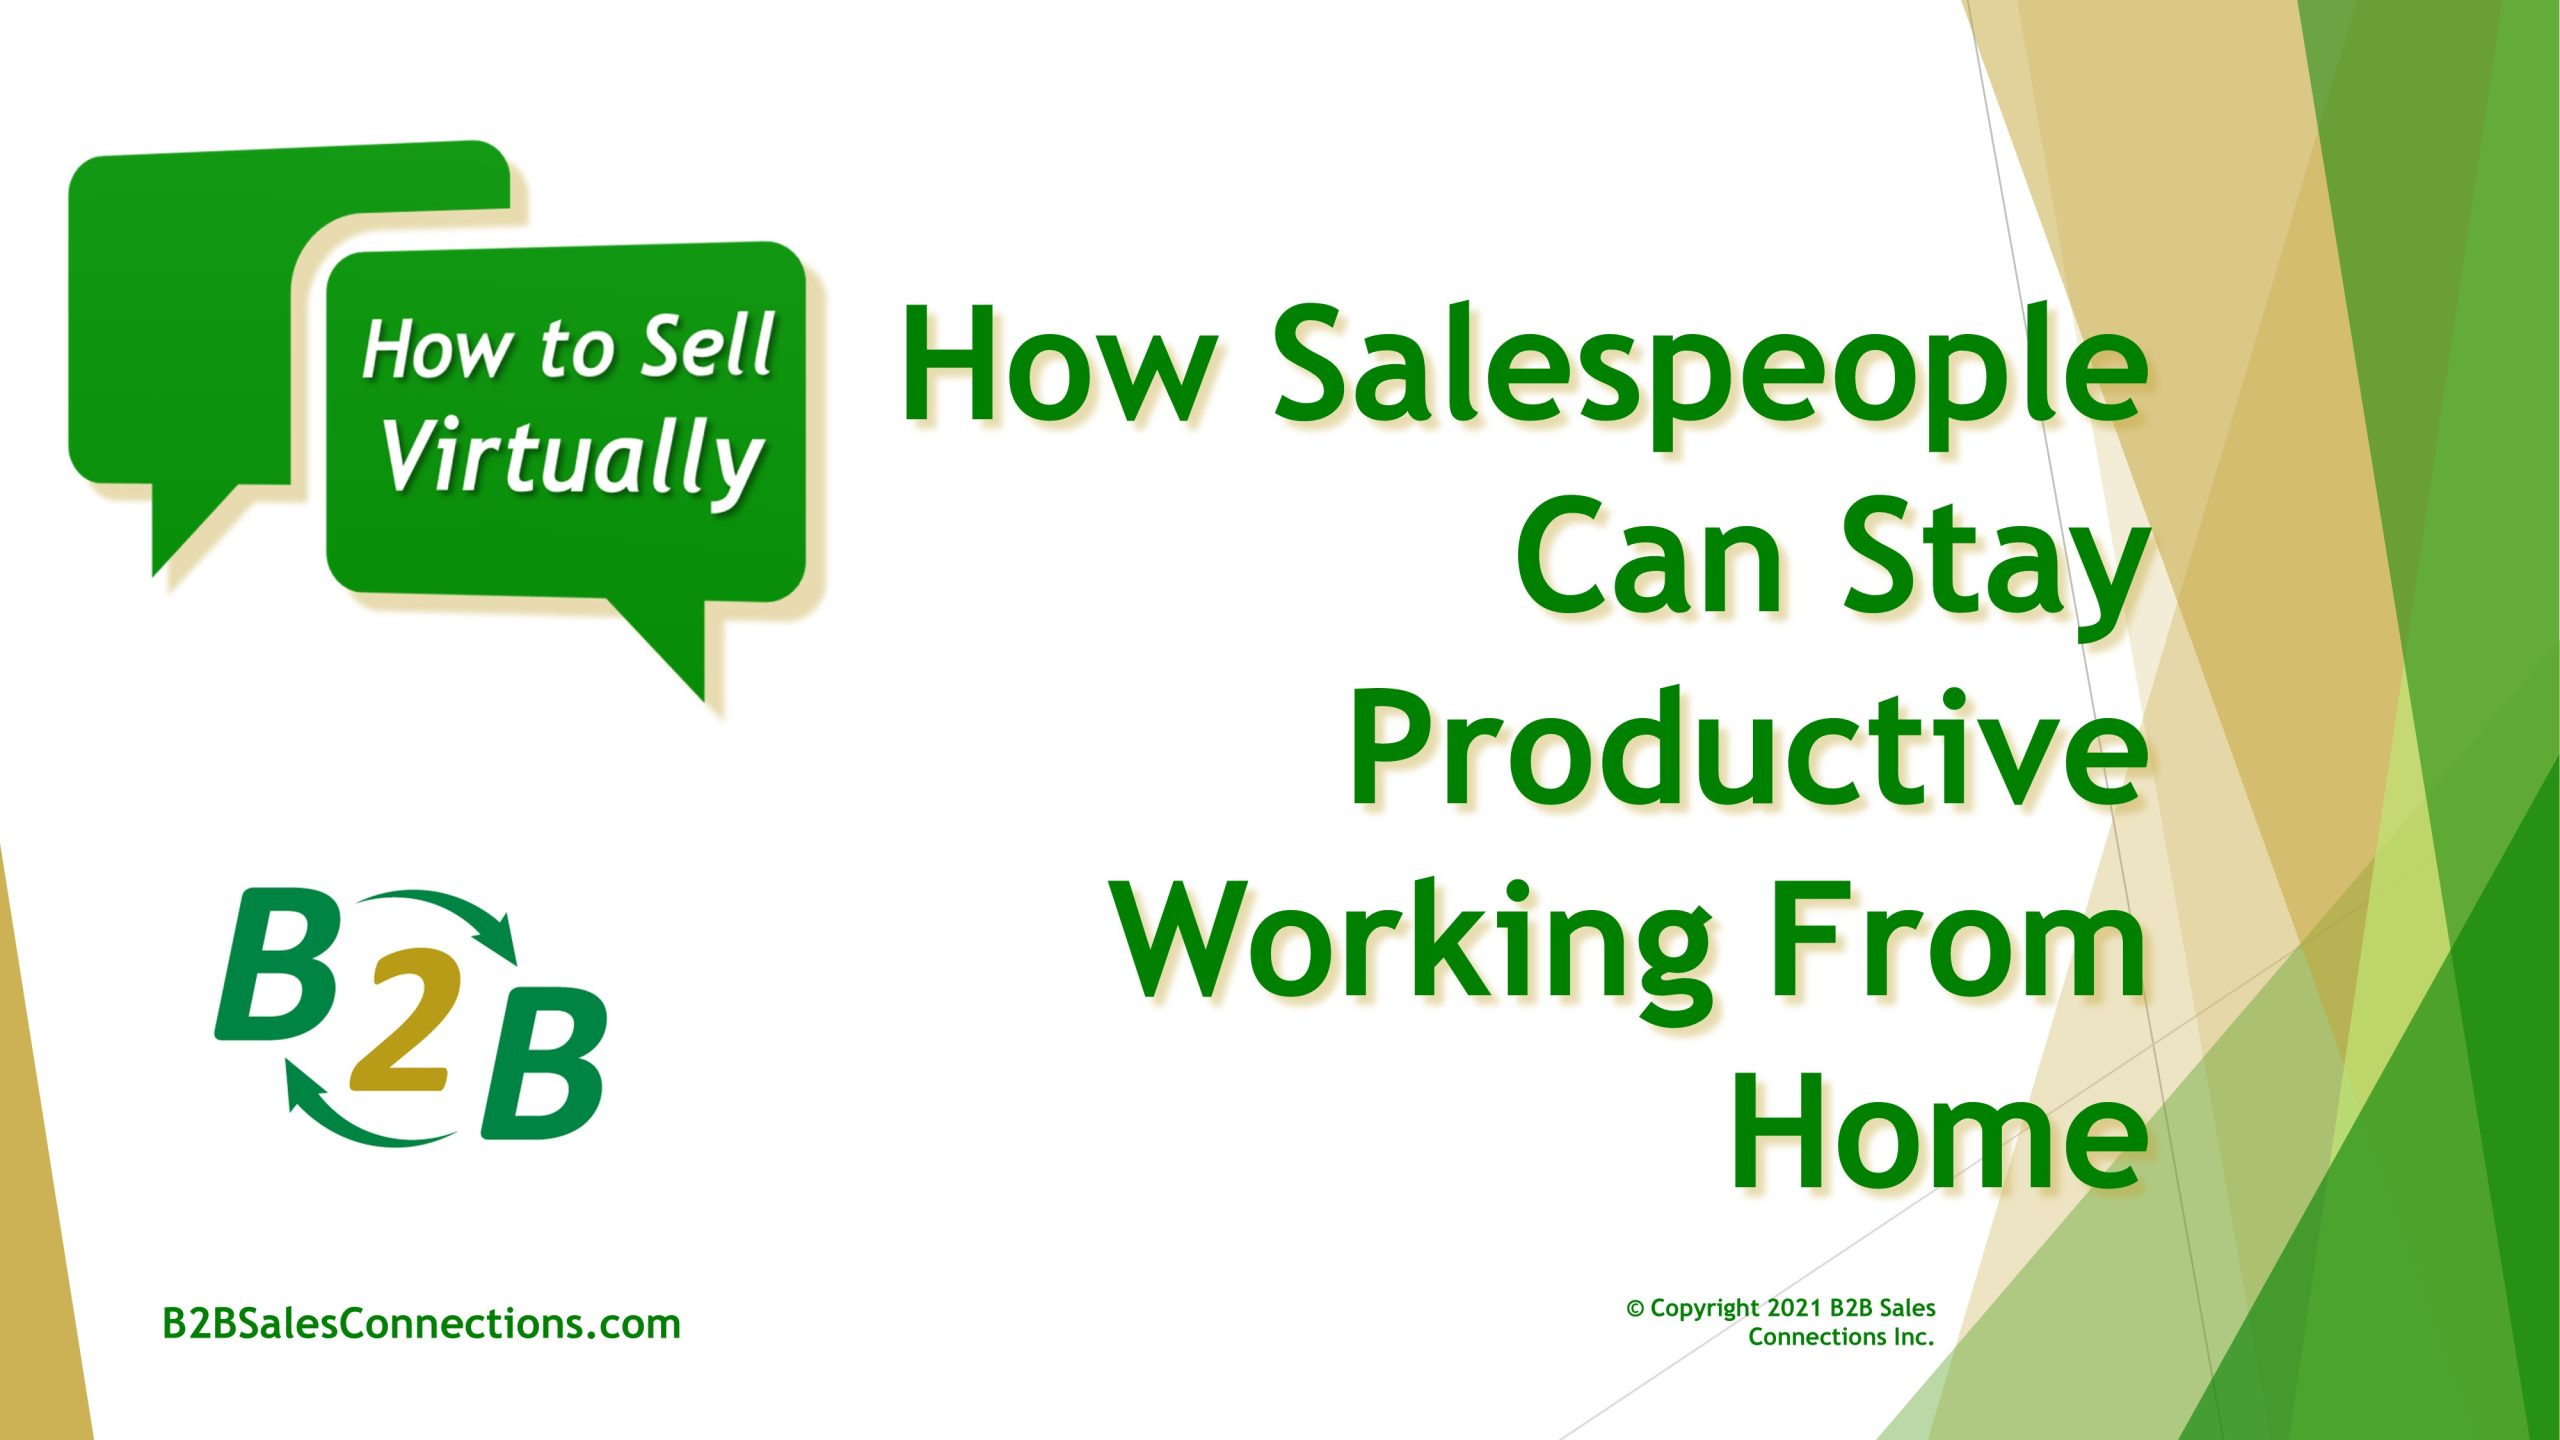 How Salespeople Can Stay Productive Working From Home